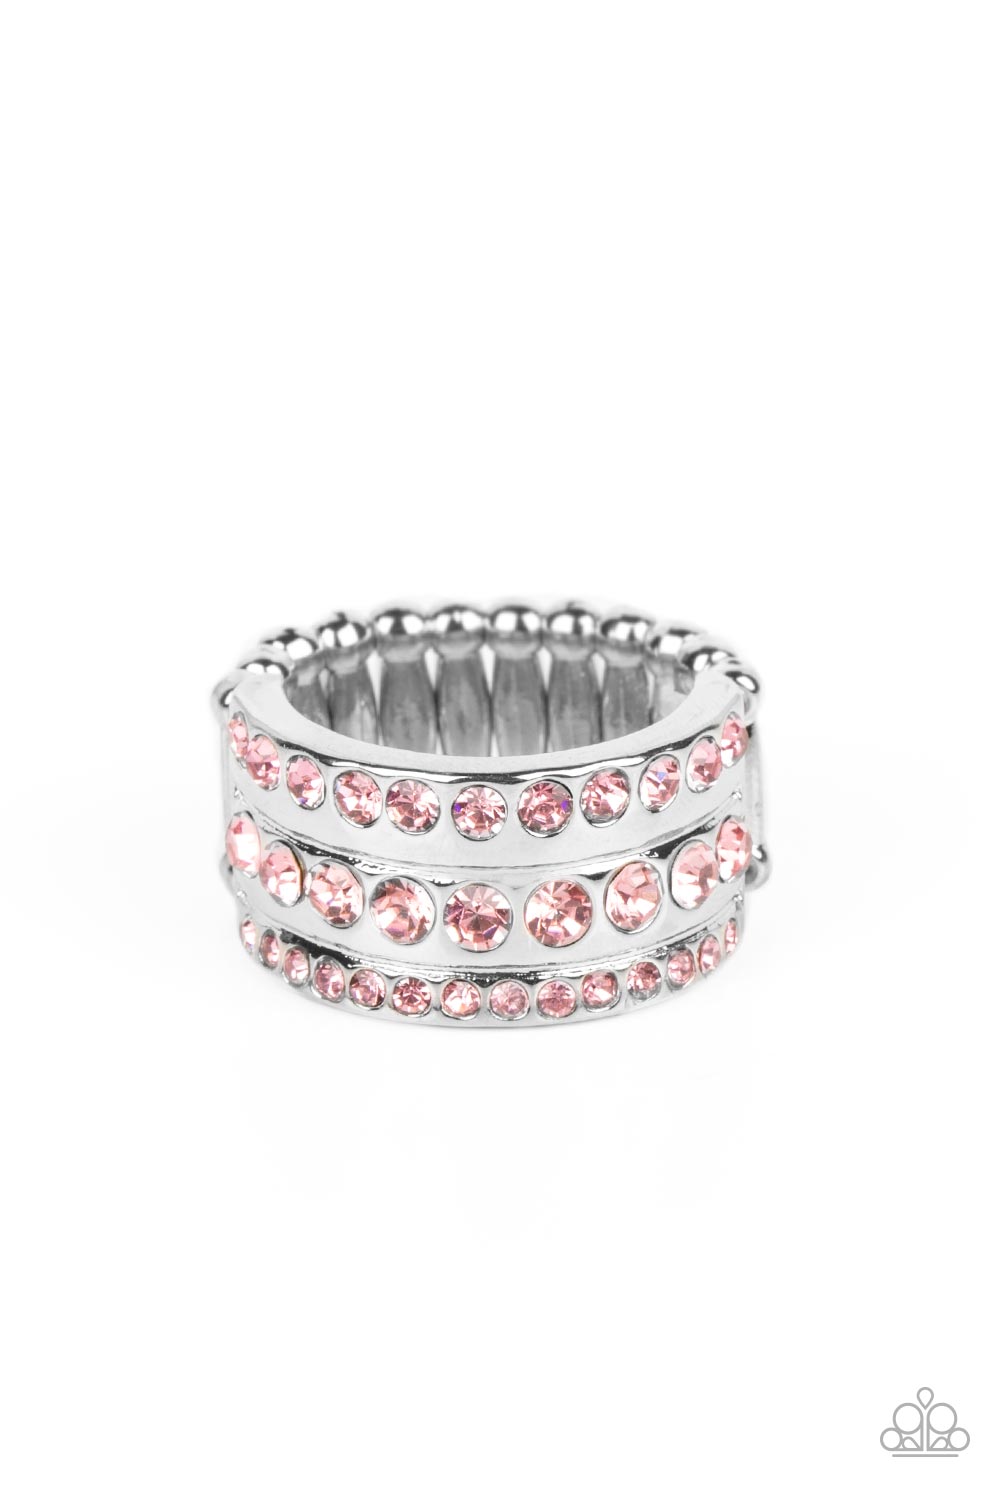 Privileged Poise Pink Ring